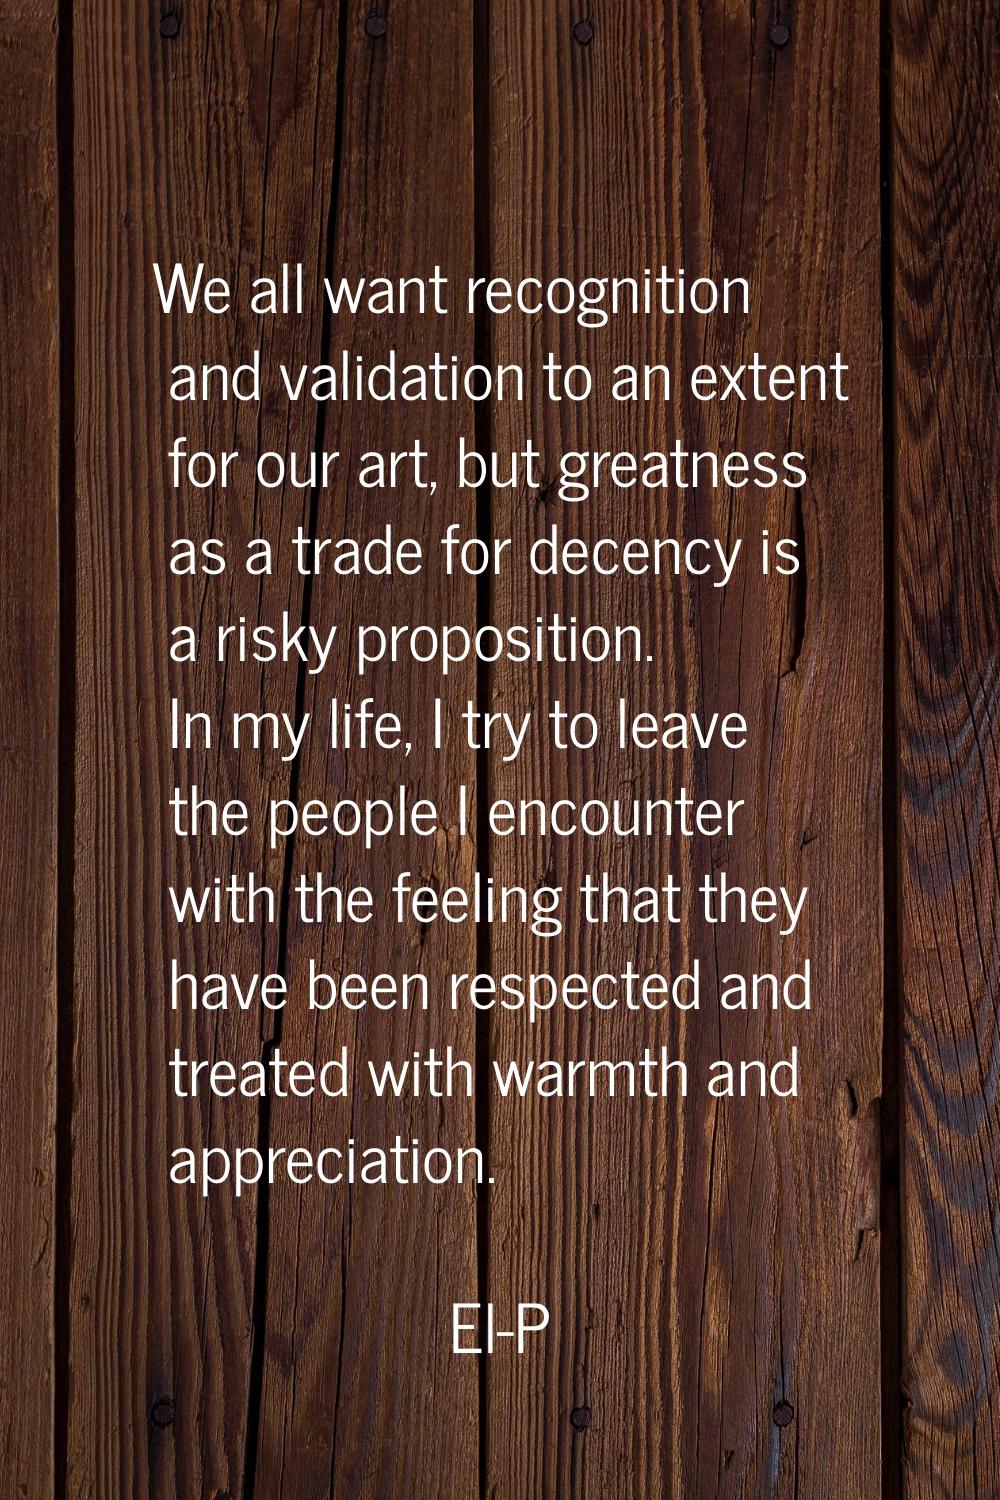 We all want recognition and validation to an extent for our art, but greatness as a trade for decen